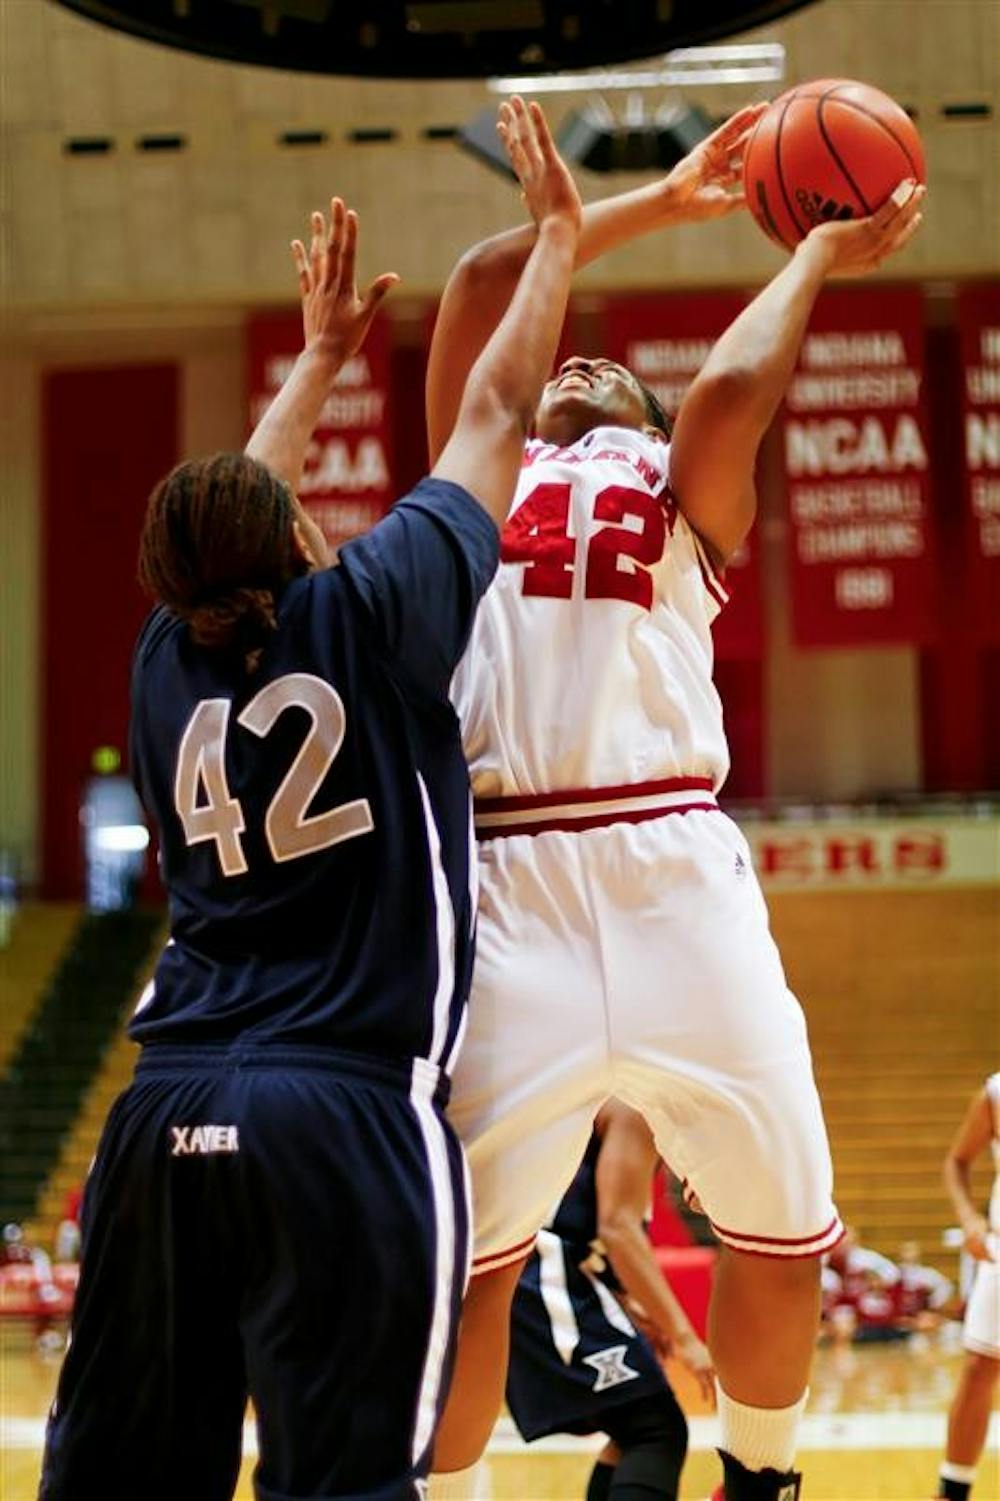 Senior forward Amber Jackson goes up strong for a shot during the Hoosiers 62-59 loss to Xavier in the second round of the Preseason WNIT Sunday afternoon at Assembly Hall.